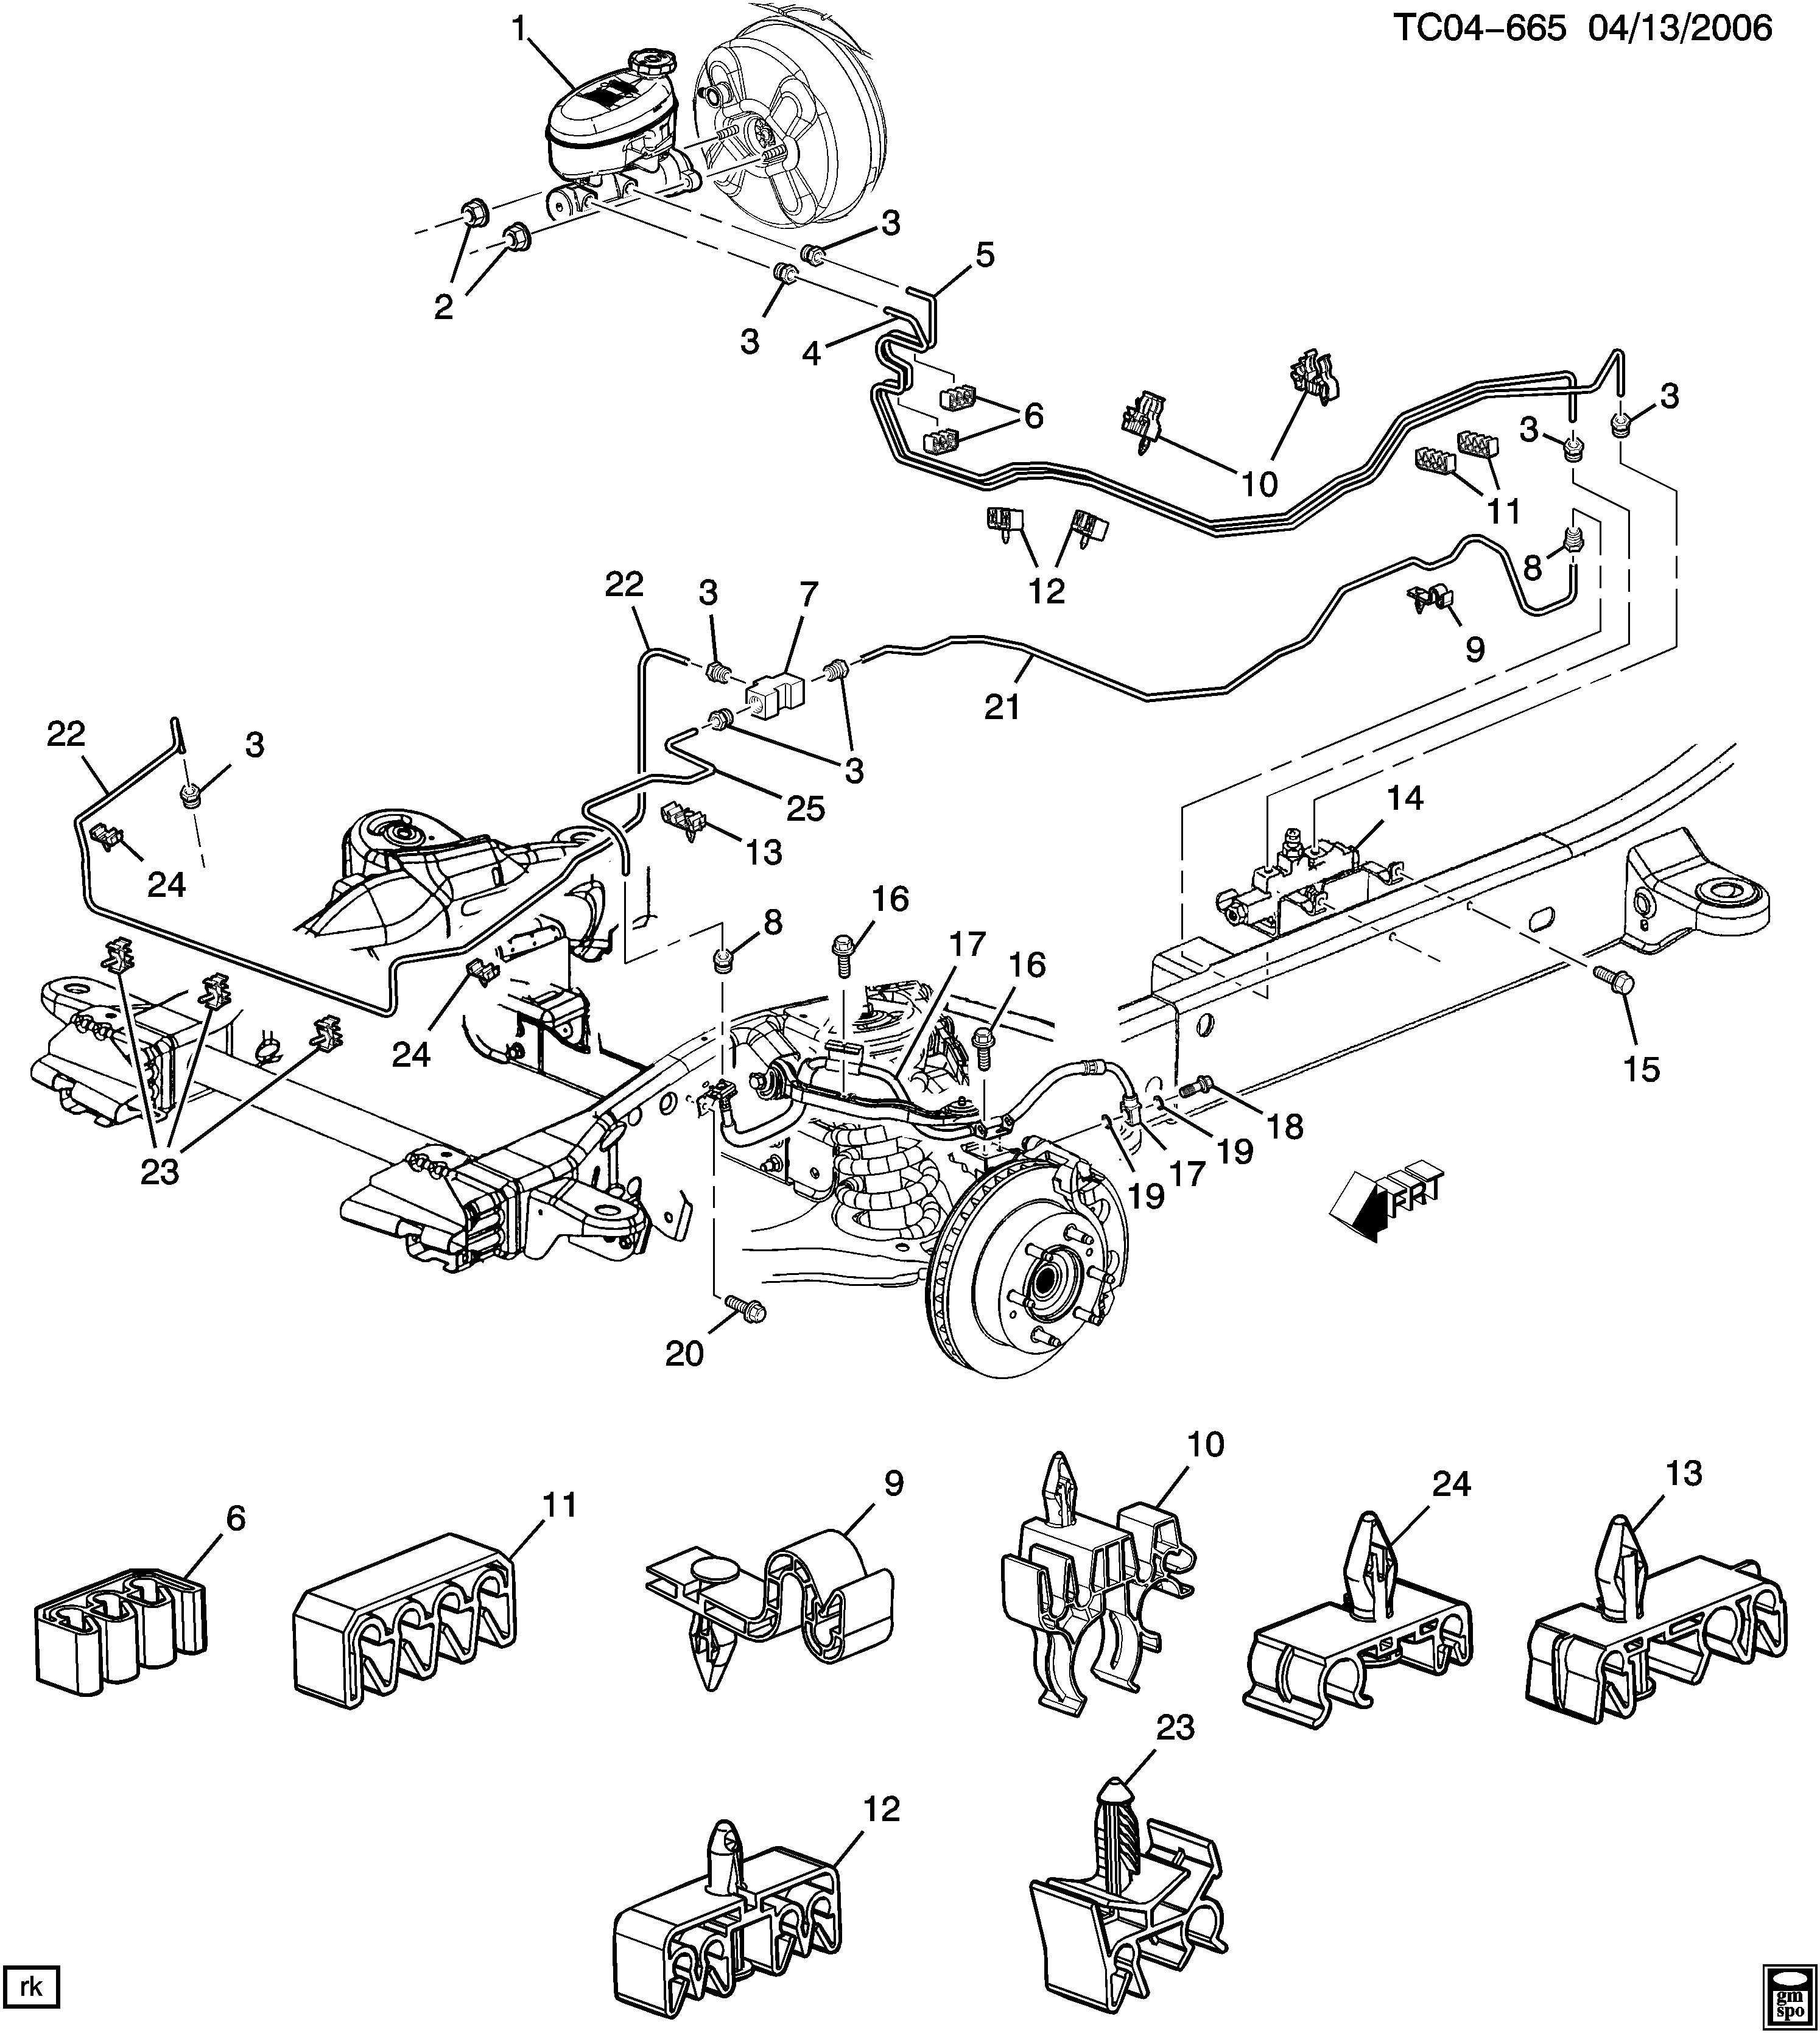 2002 Chevy Avalanche Parts Diagram Avalanche 1500 2wd Brake Lines Front Chevrolet Epc Line Of 2002 Chevy Avalanche Parts Diagram